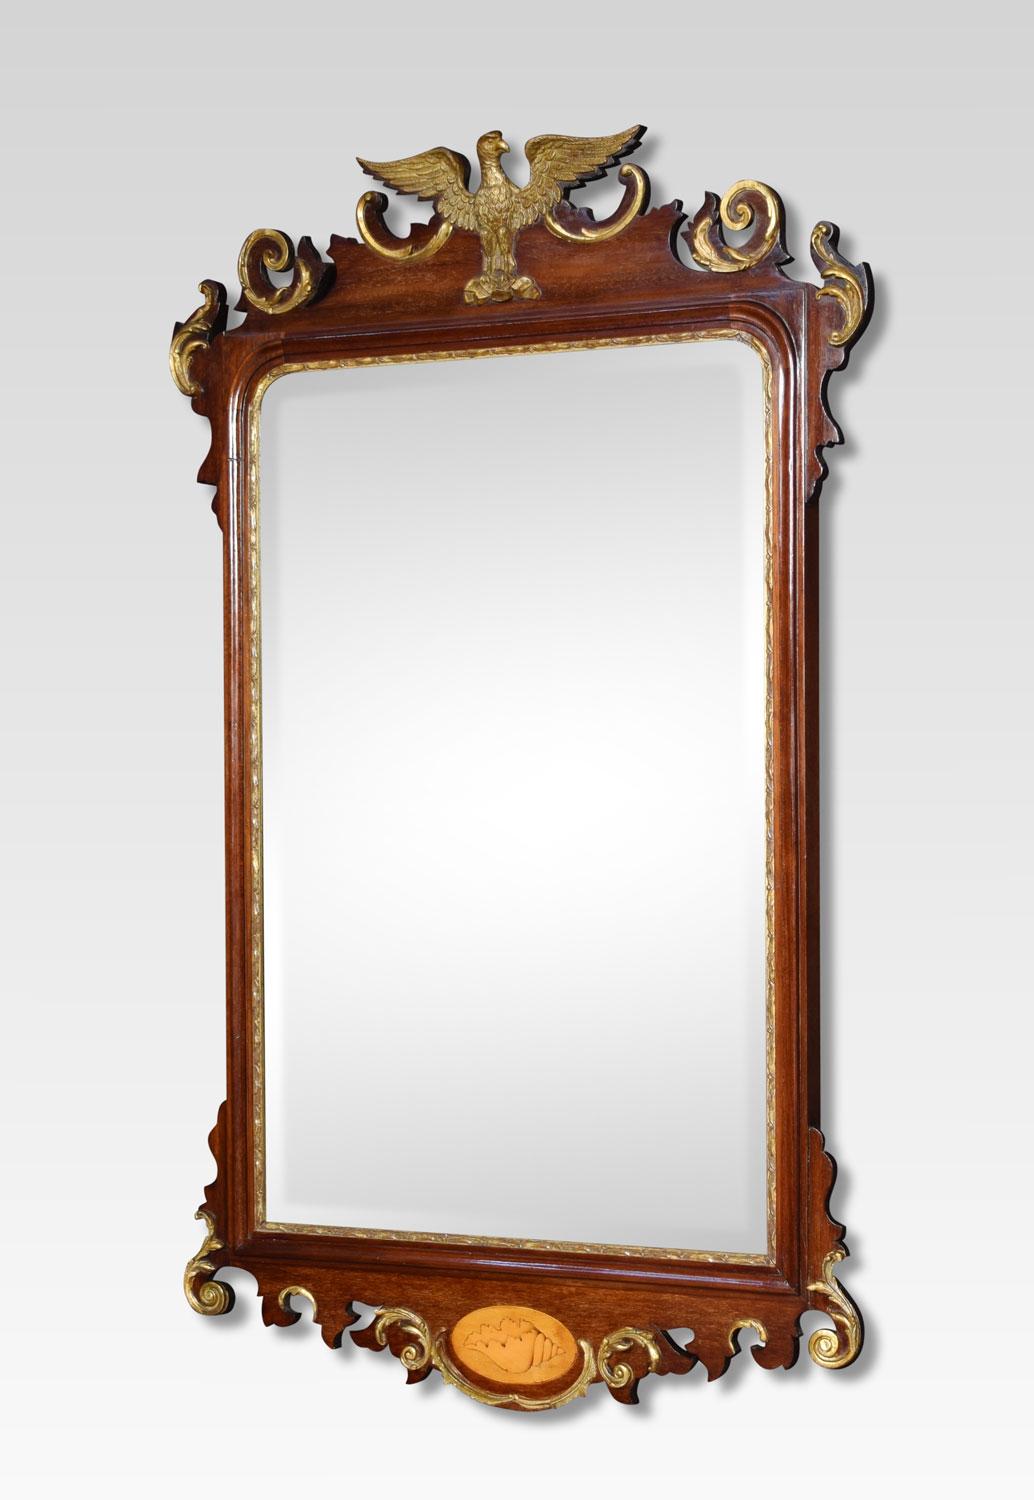 George II style mahogany and giltwood wall mirror. The shaped cresting rail surmounted with an eagle and leaf decoration. The rectangular mirror plate enclosed by scrolling mahogany frame.
Dimensions:
Height 43 inches
Width 27 inches
Depth 3